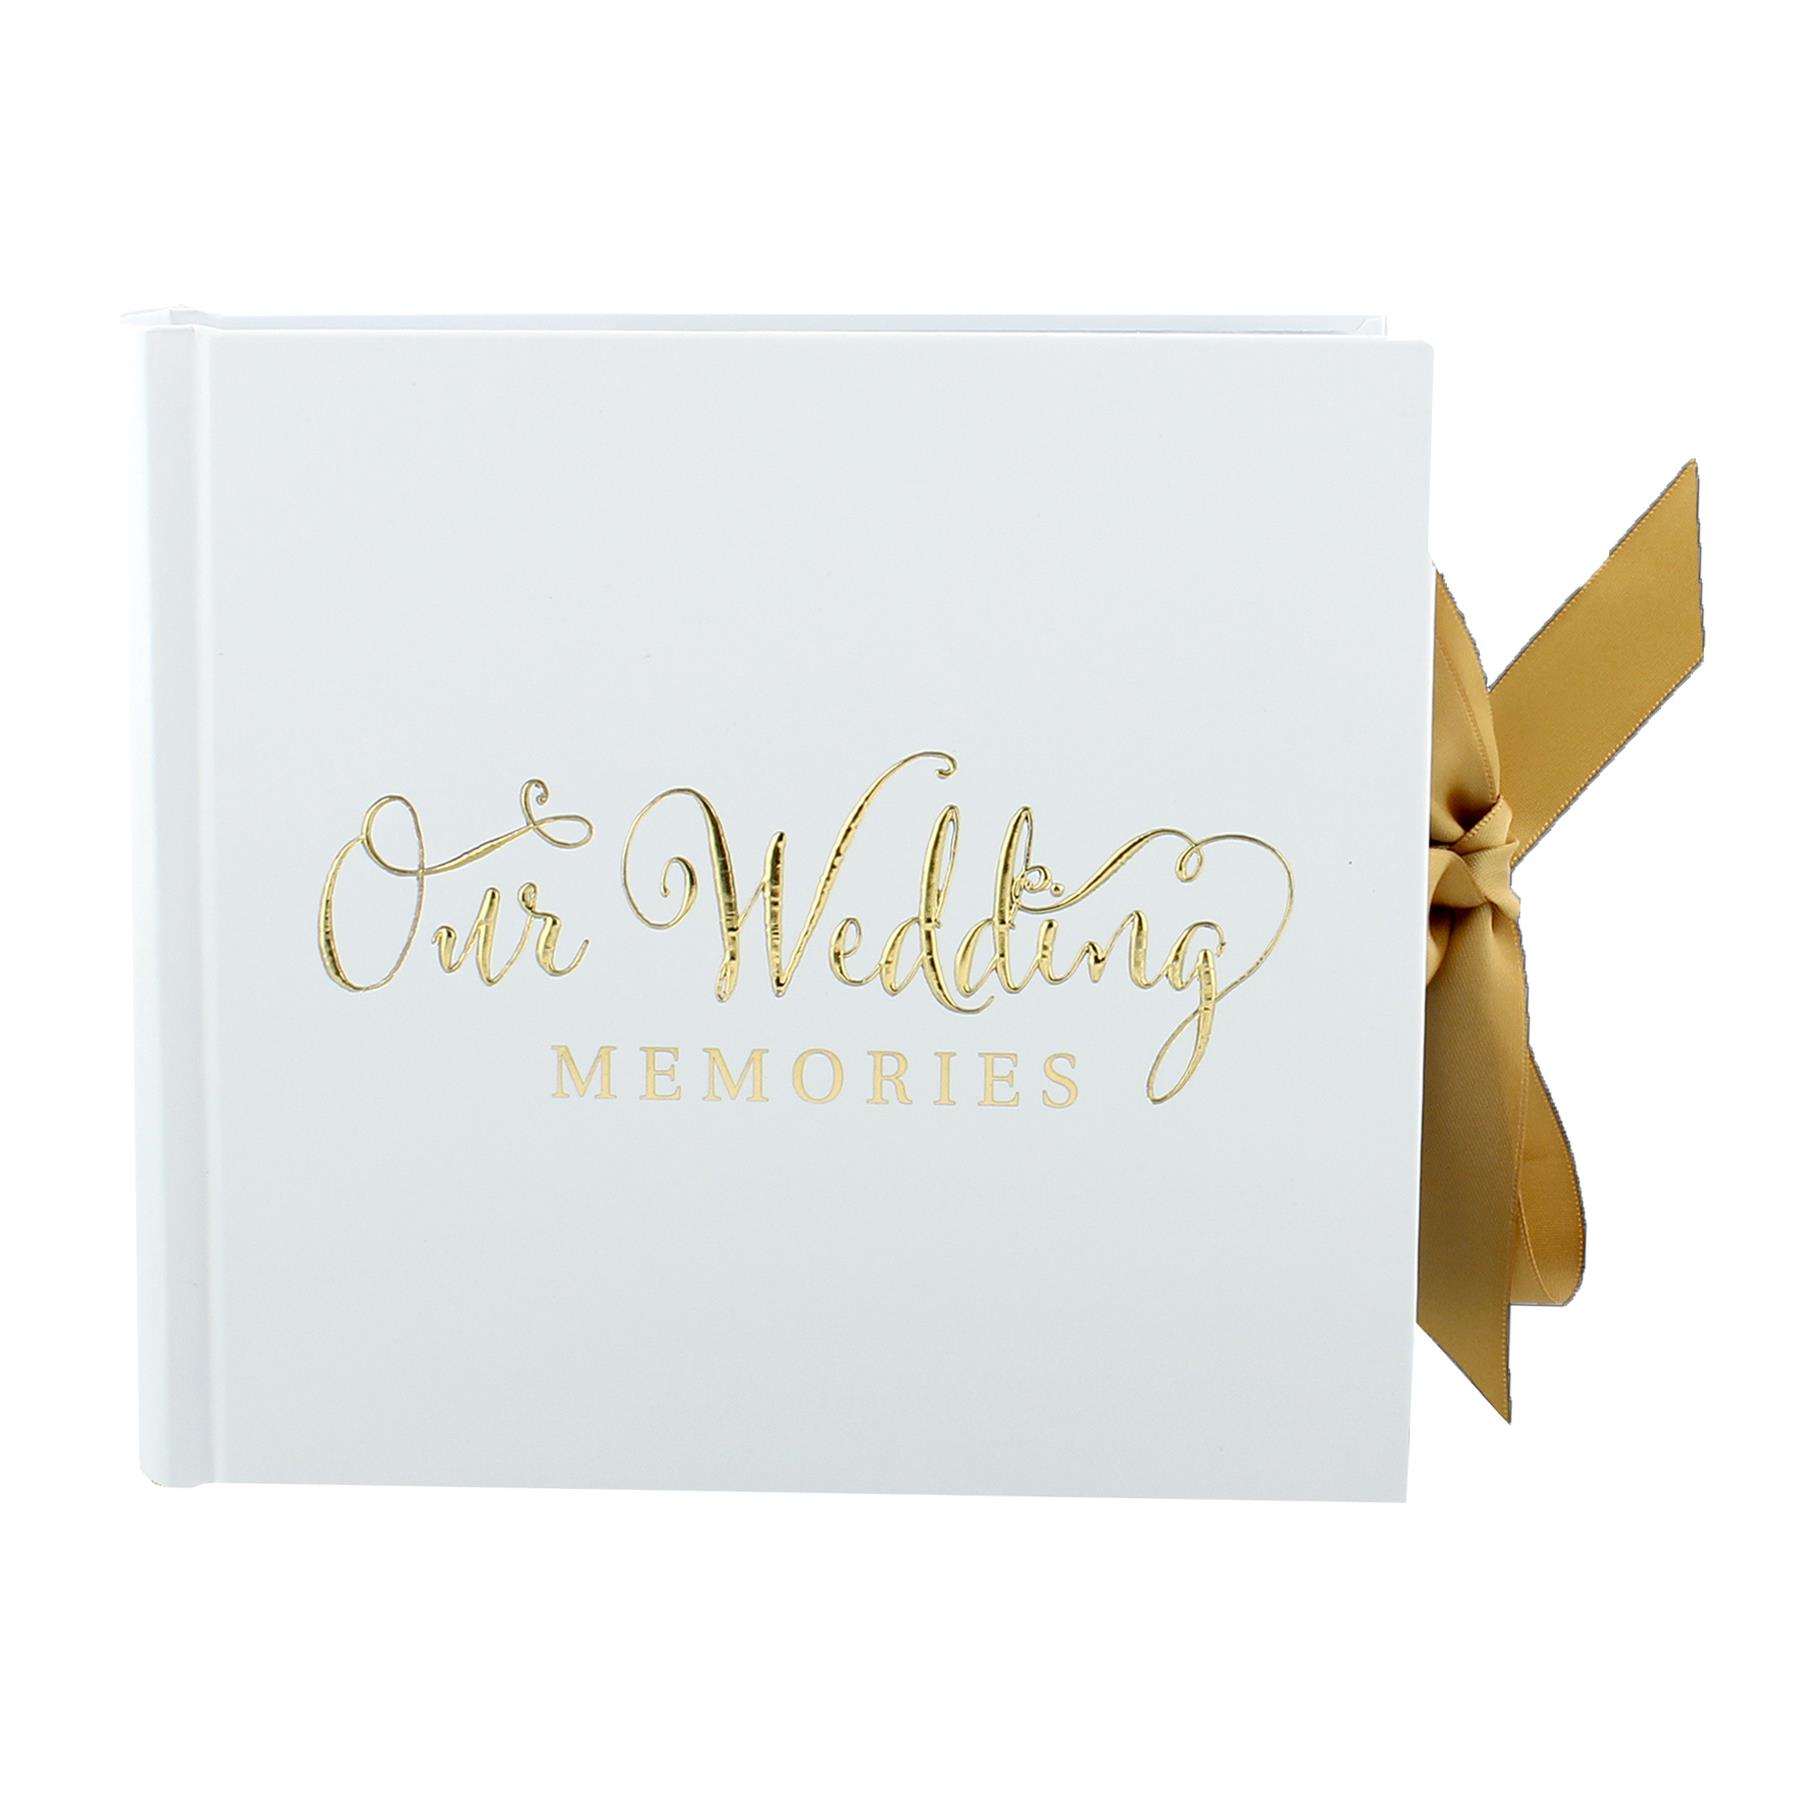 Always and Forever Range Gold Foil 'Our Wedding' - 80 6X4 Photo Album